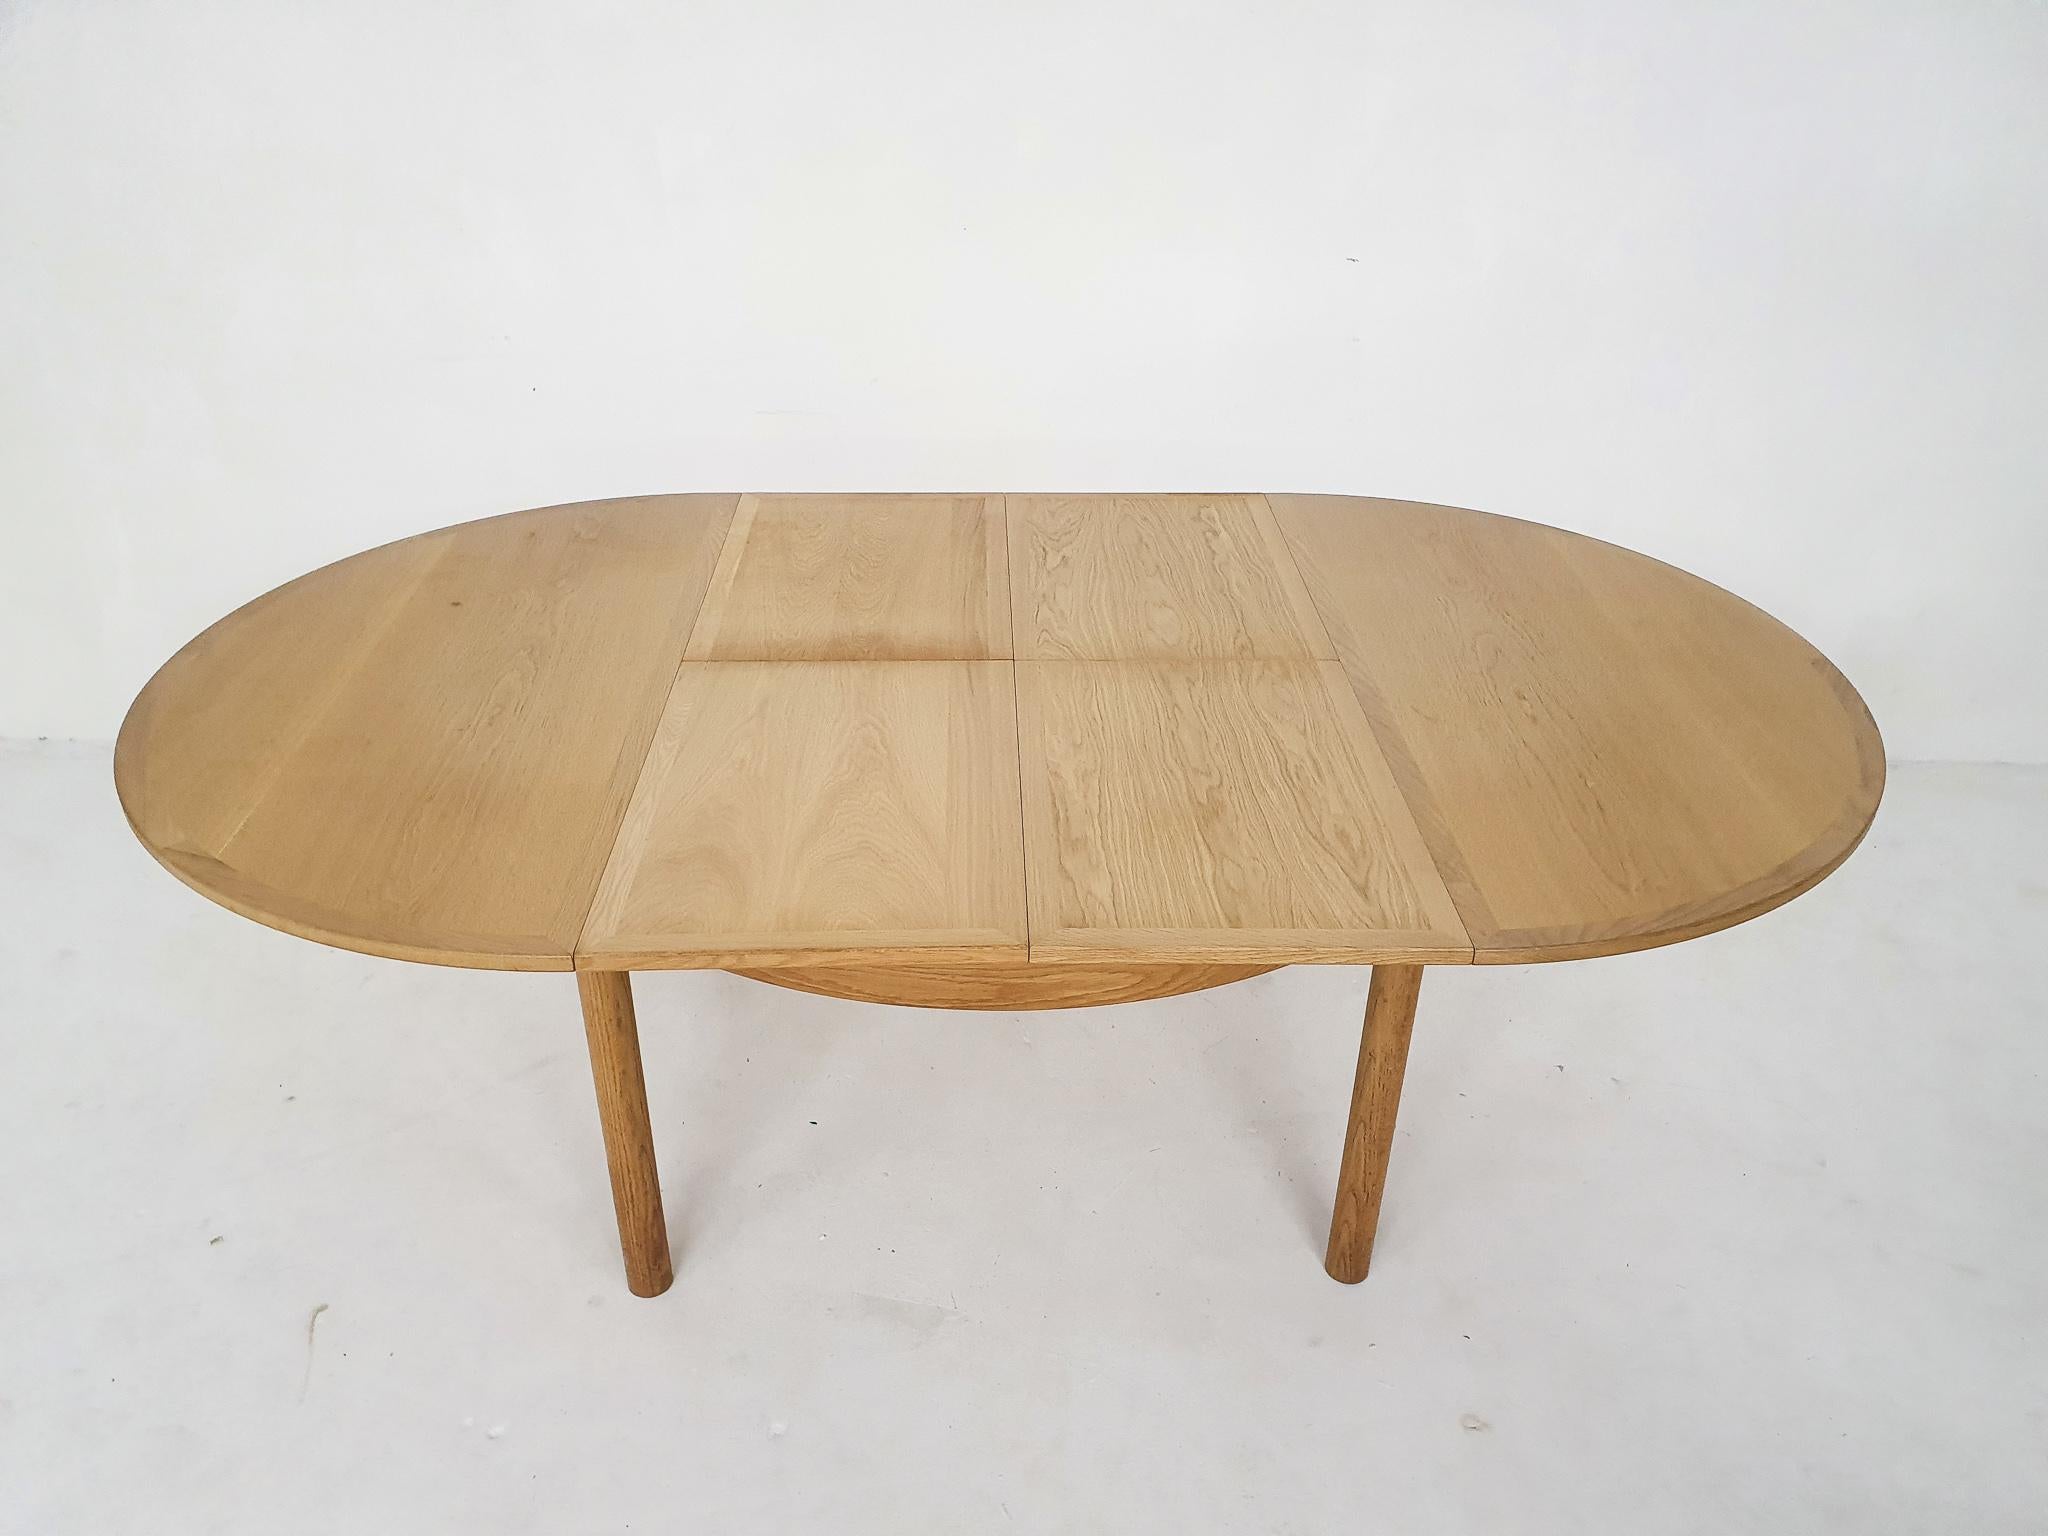 20th Century Round oak extendable dining table by Borge Mogensen for Karl Andersson, Denmark 